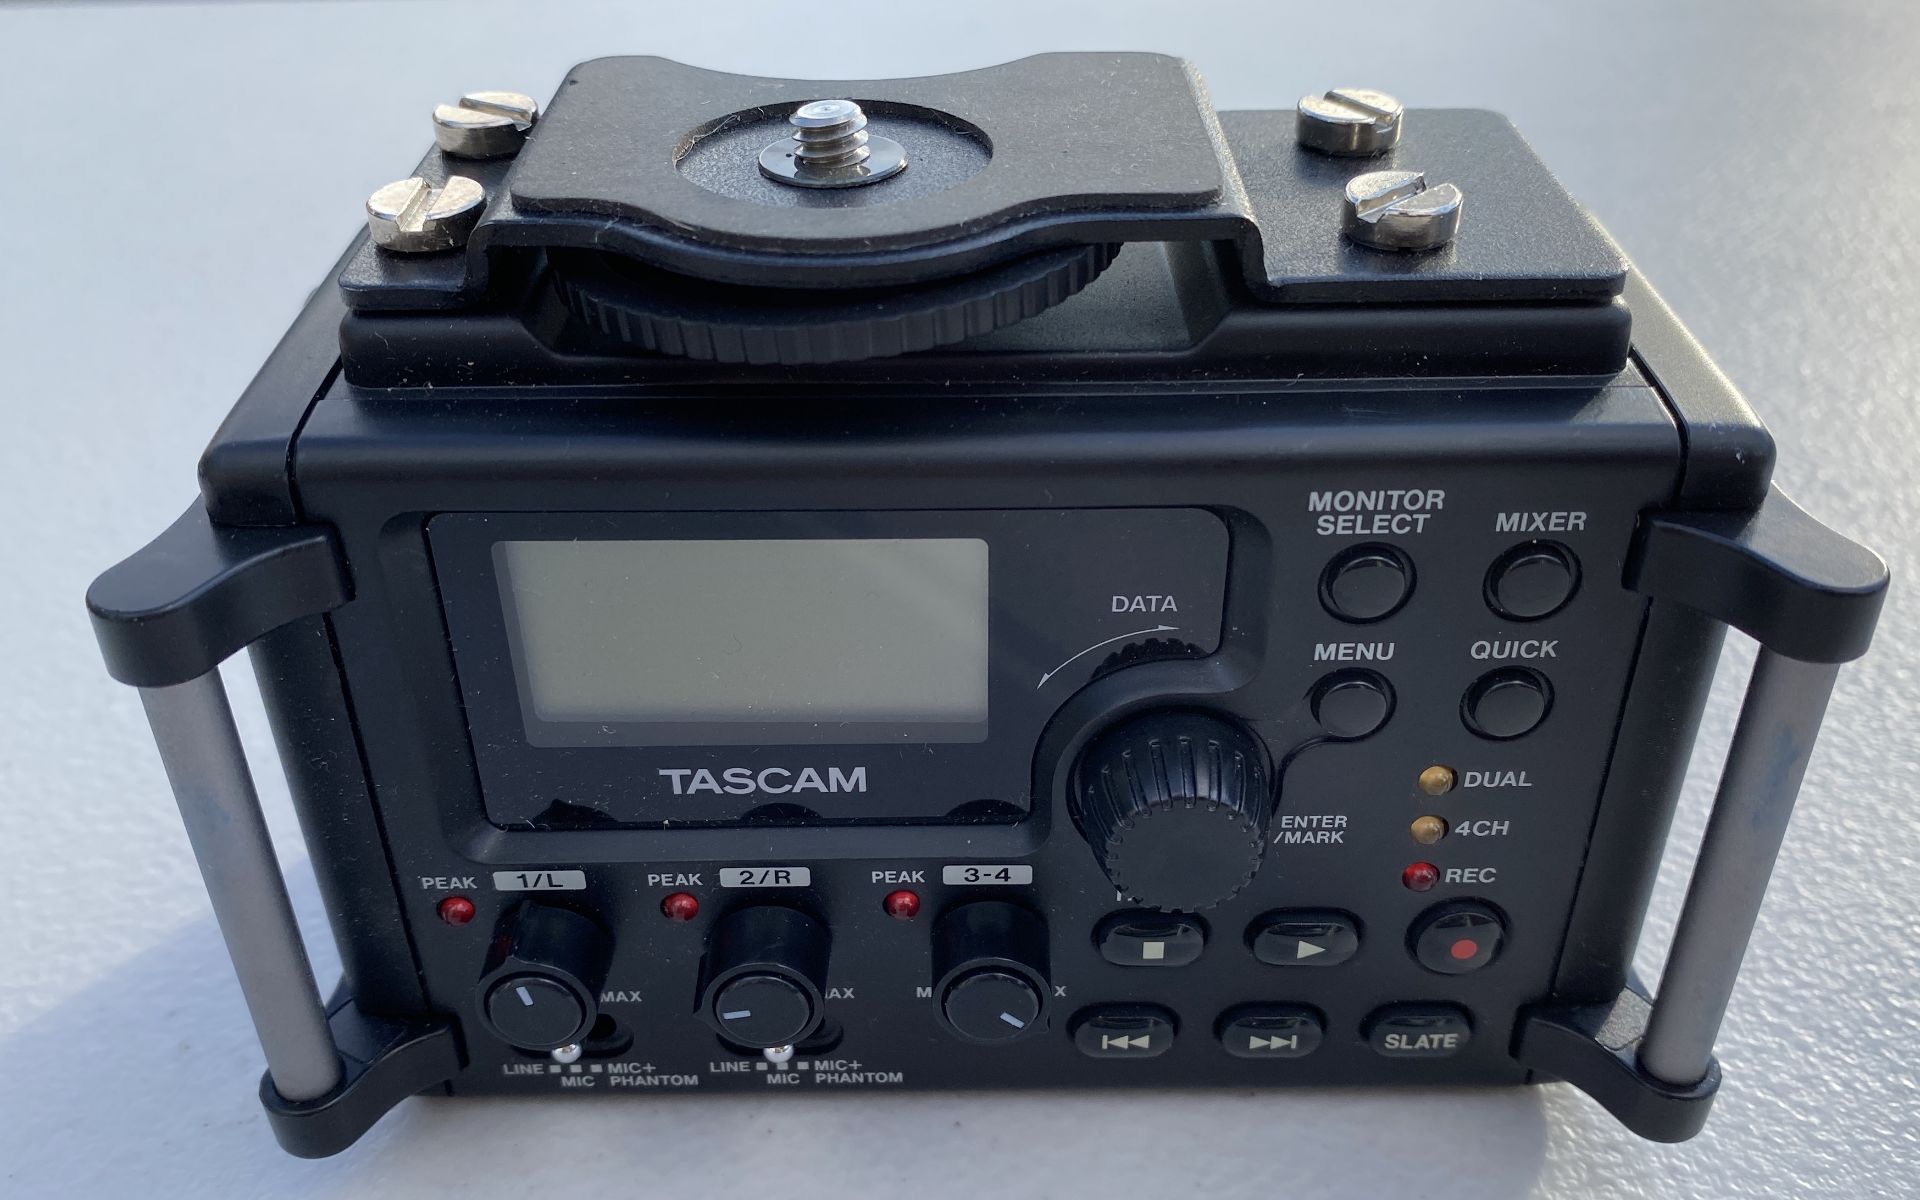 Tascam Linear PCM Recorder DR-60D, Swrial No.0060771 - Image 3 of 10